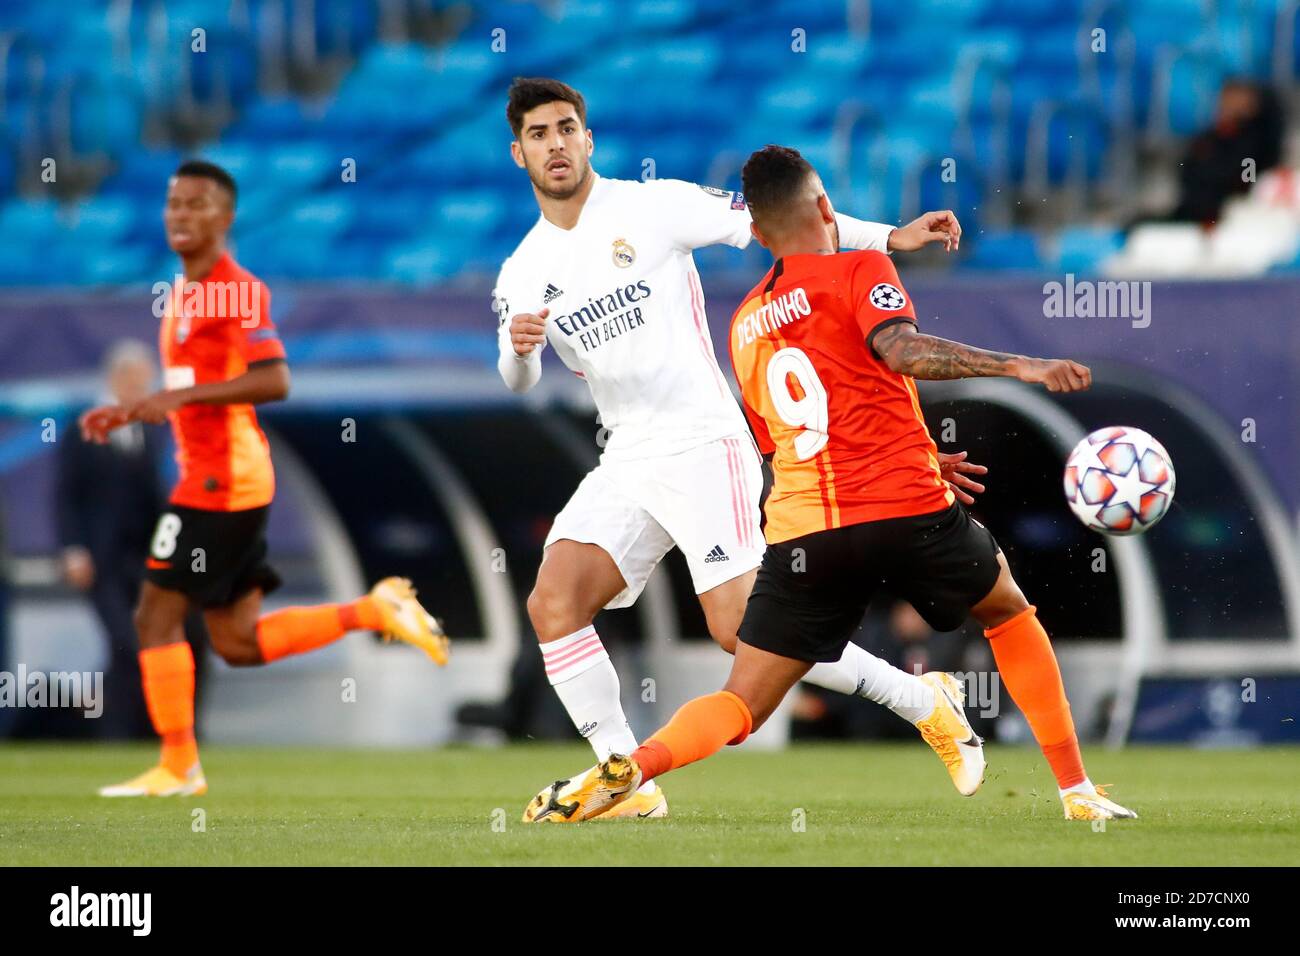 arco Asensio of Real Madrid and Bruno 'Dentinho' Ferreira of Shakhtar Donetsk in action during the UEFA Champions League, Group Stage, Group B footba Stock Photo